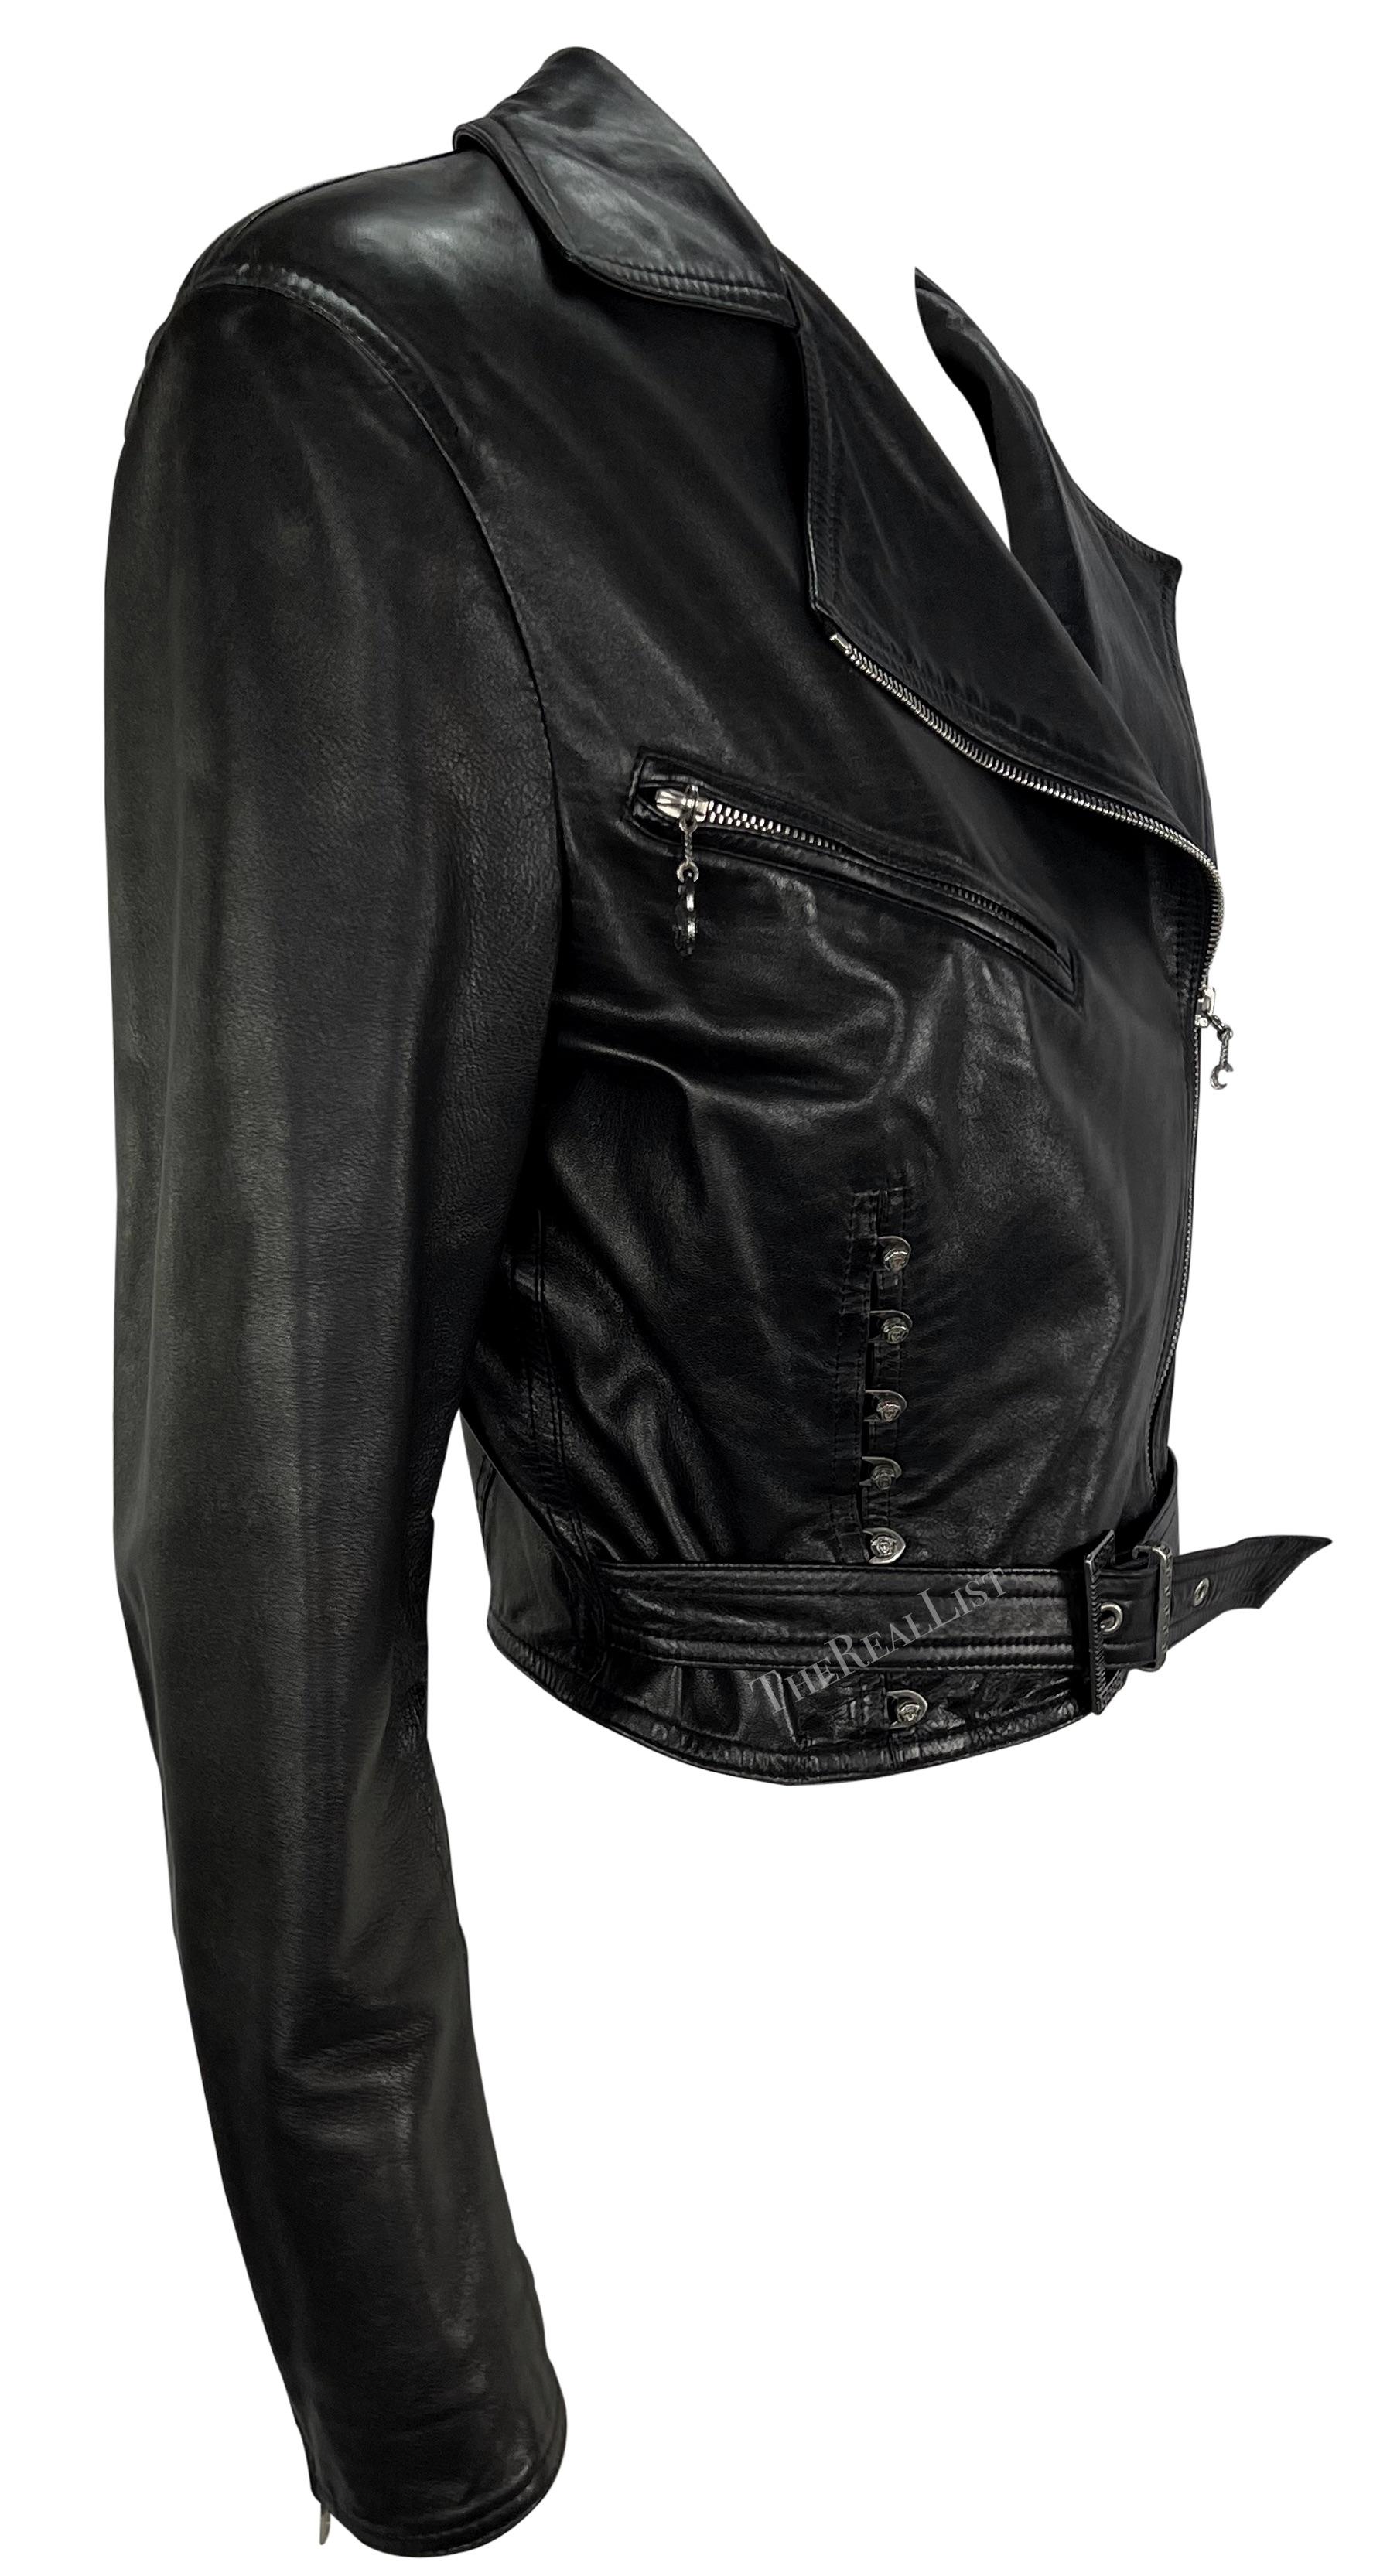 S/S 1995 Gianni Versace Corsetry Style Black Leather Cropped Leather Jacket For Sale 3